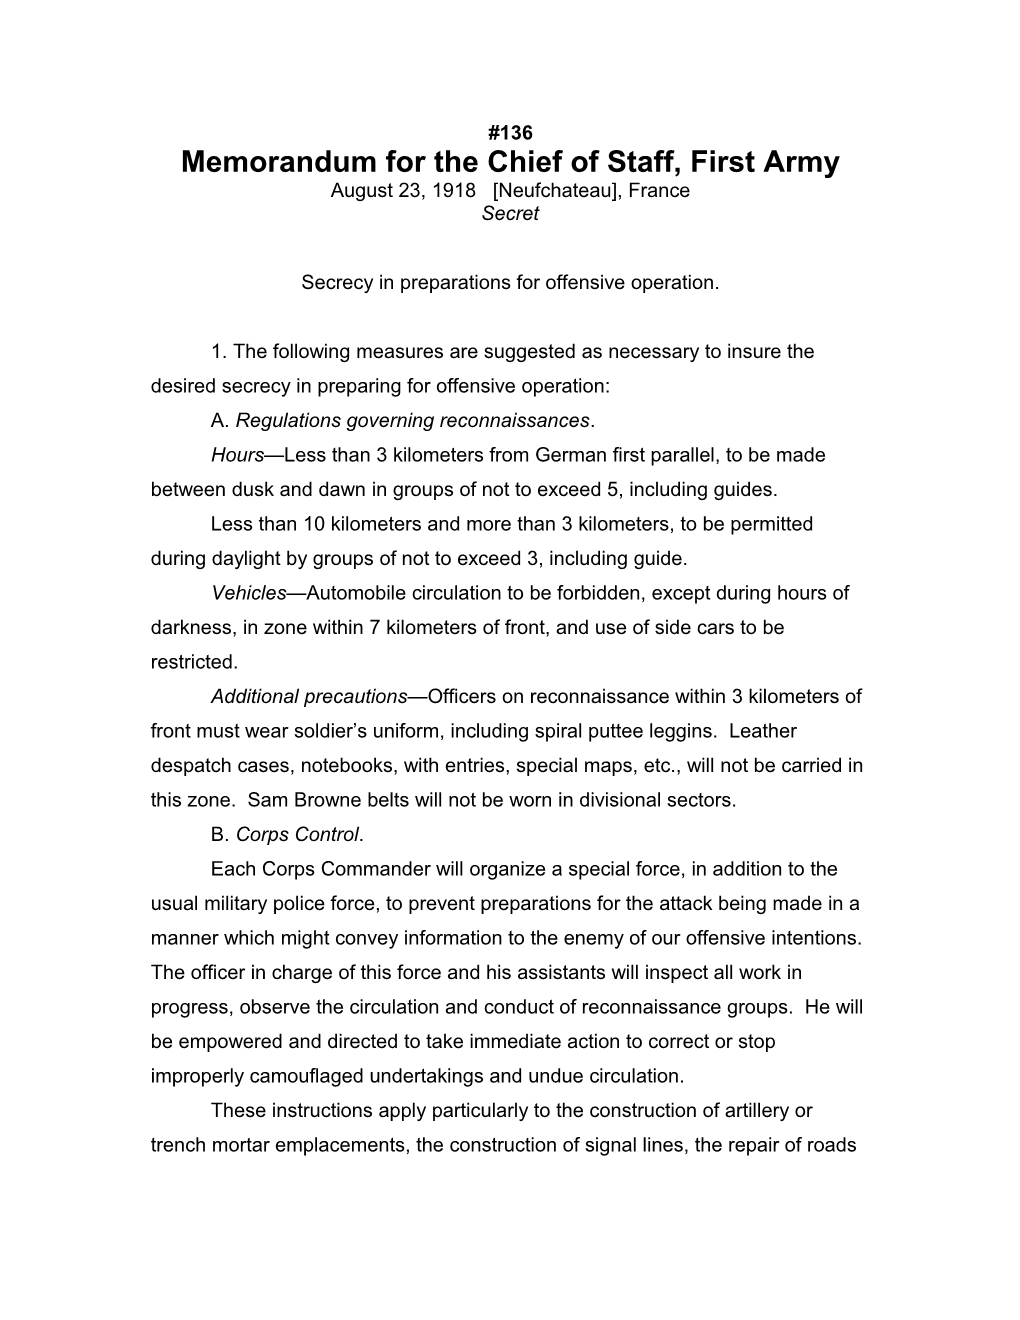 Memorandum for the Chief of Staff, First Army